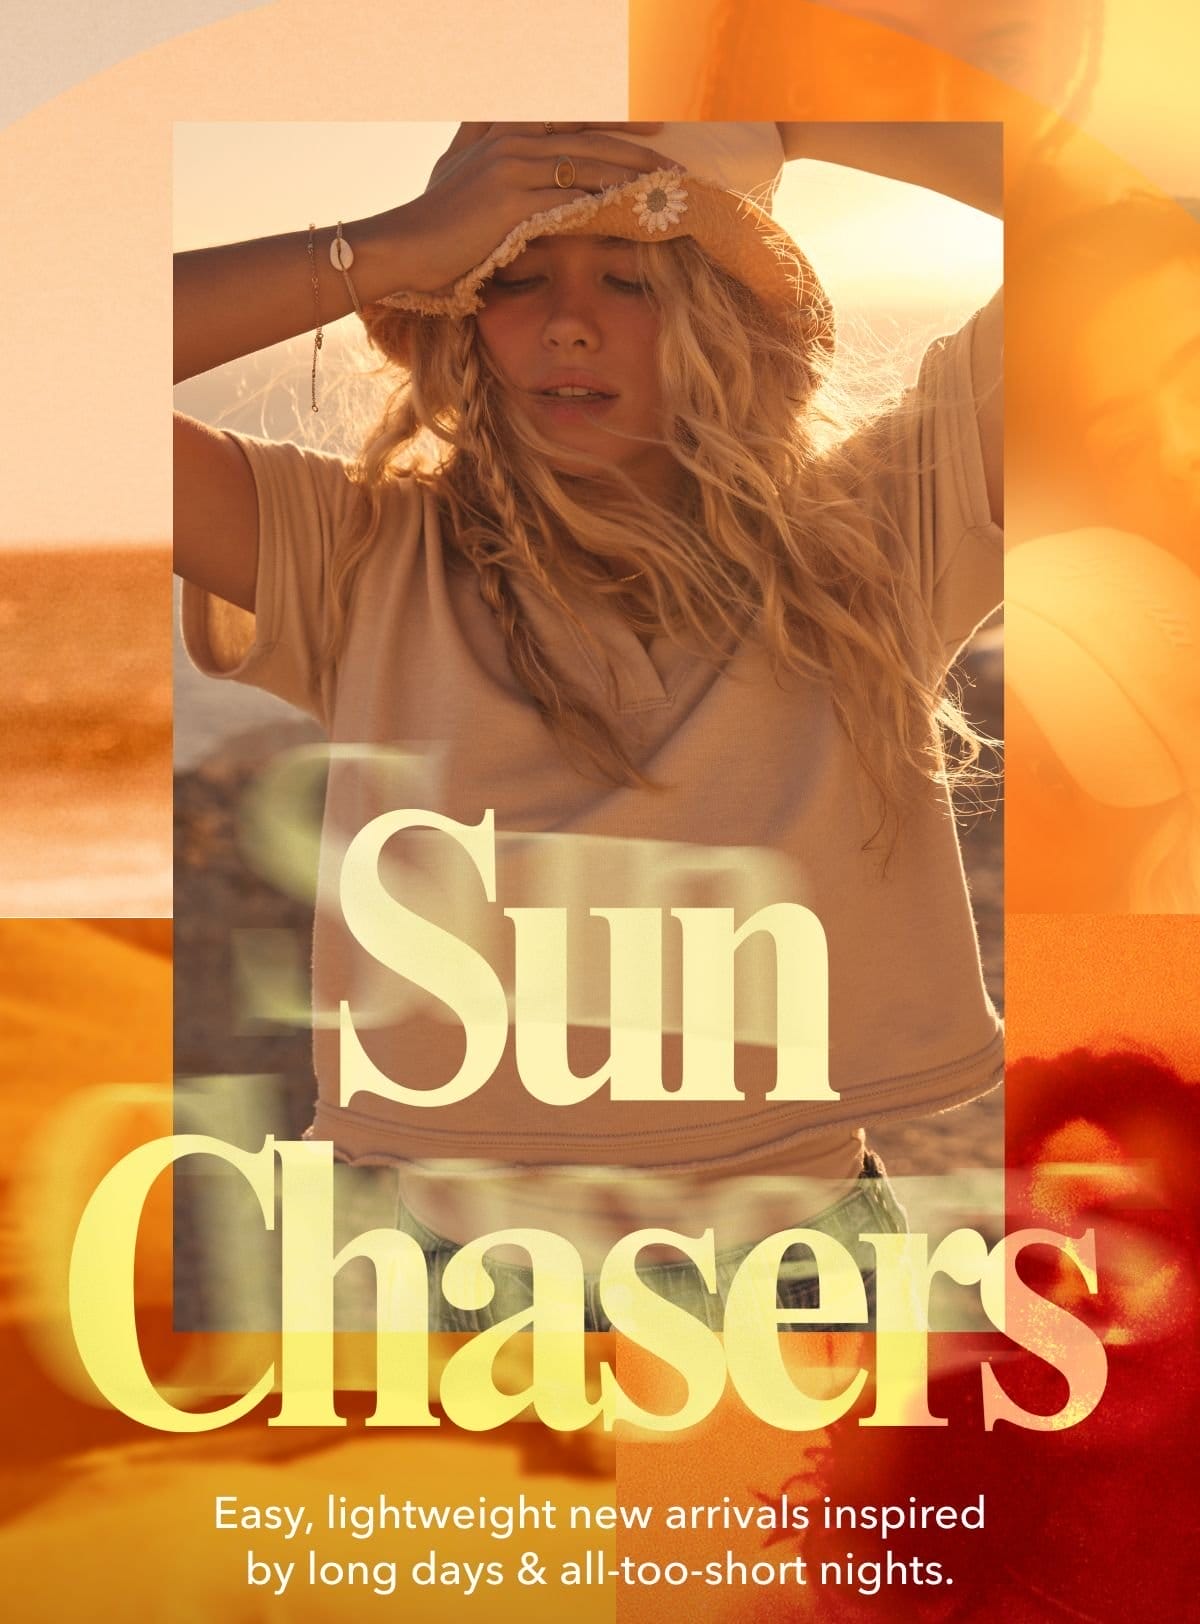 SUN CHASERS Easy, lightweight new arrivals inspired by long days & all-too-short nights.